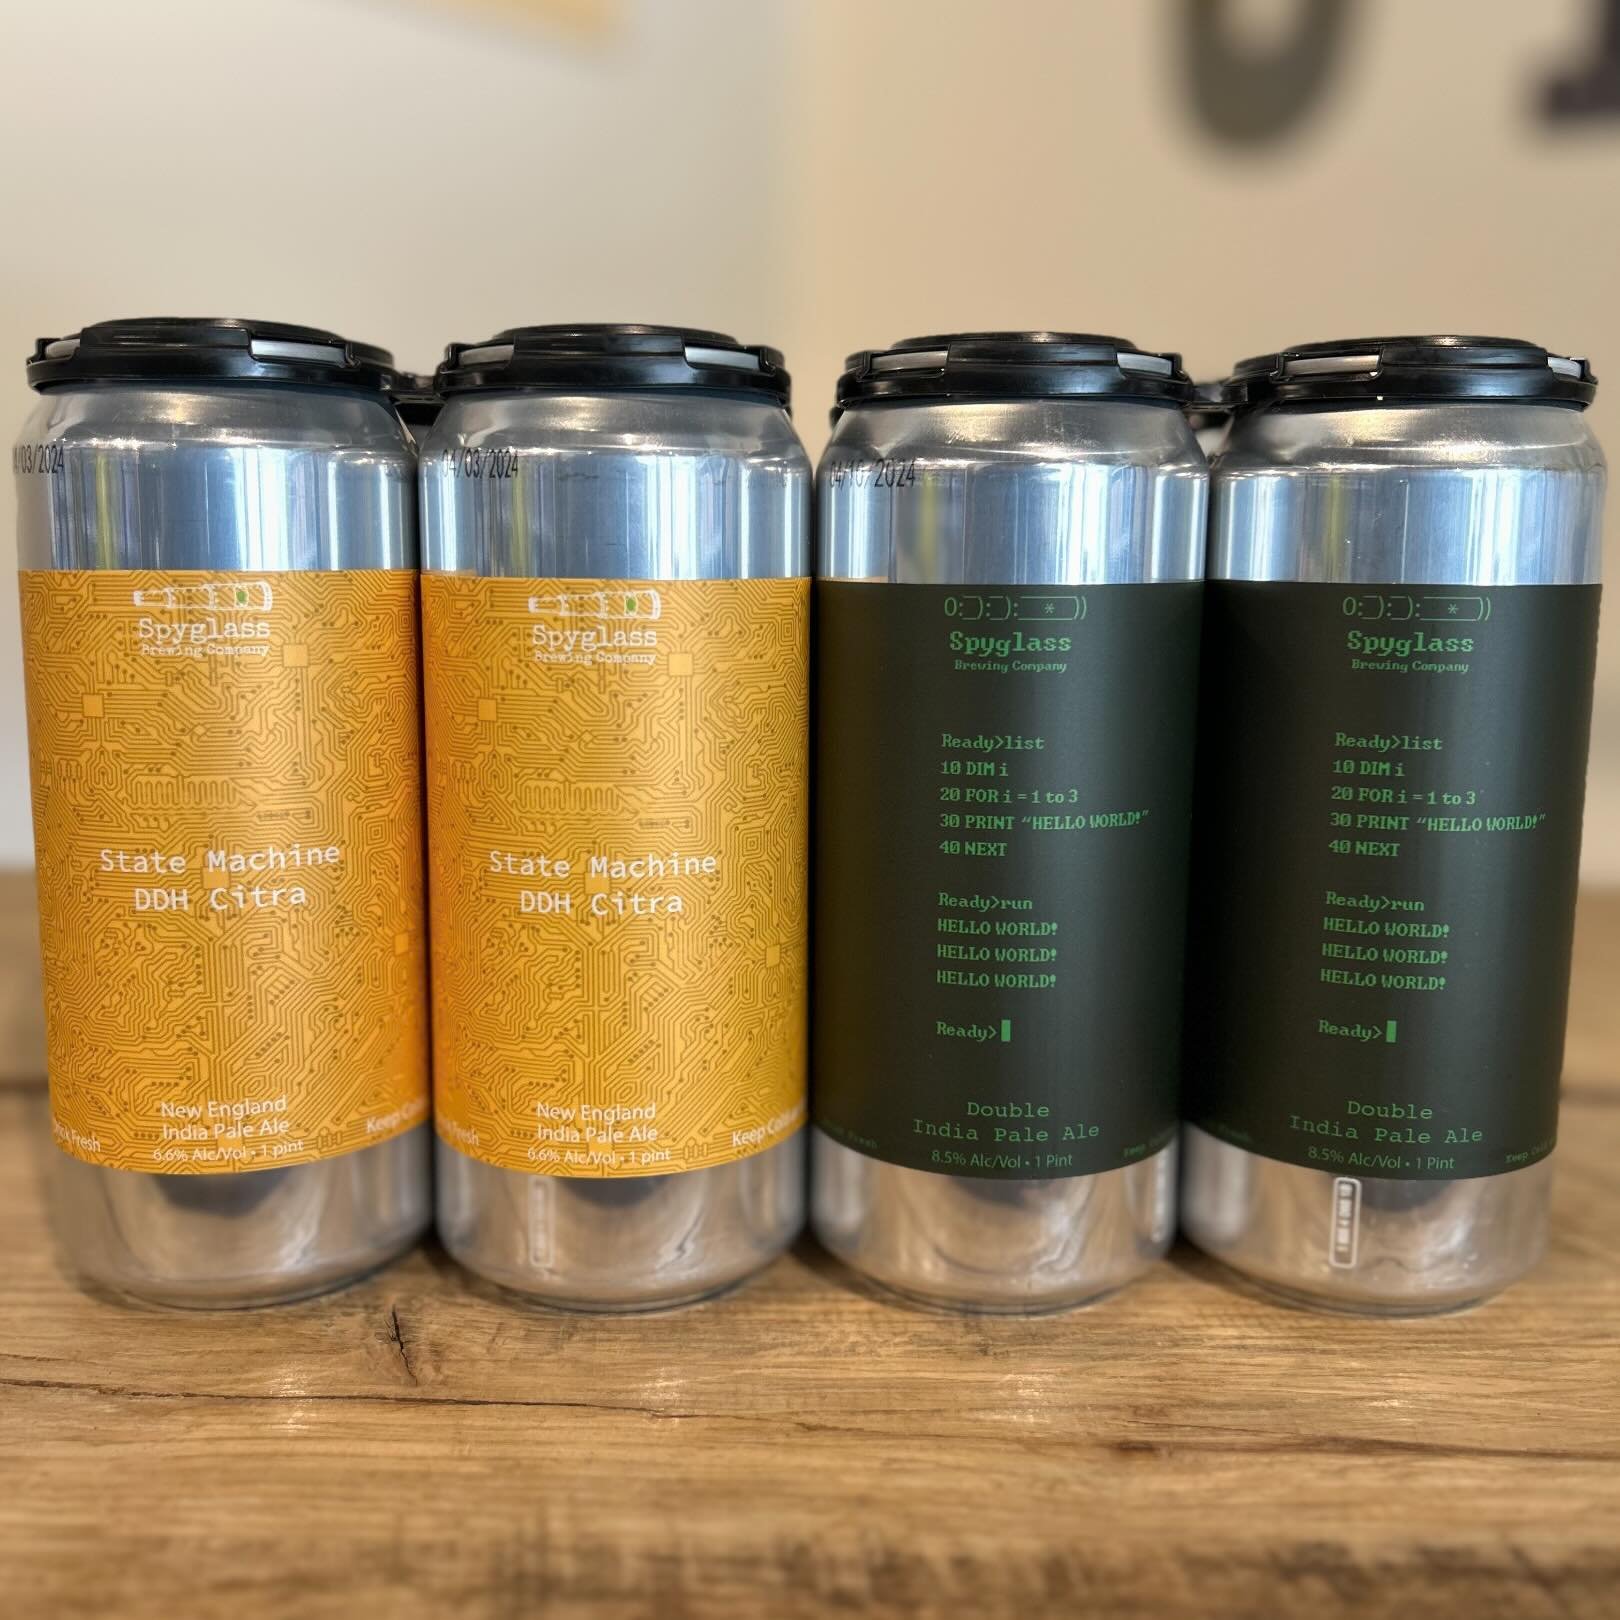 @spyglassbrewing is back in the shop this week #NowAvailable #SudburyCraftBeer #TheSuds
&mdash;
State Machine DDH Citra - 6.6% ABV NEIPA
Flavors of ripe tangerine with a touch of pine dankness. One sip encourages another!
&mdash;
Hello World!

This 8